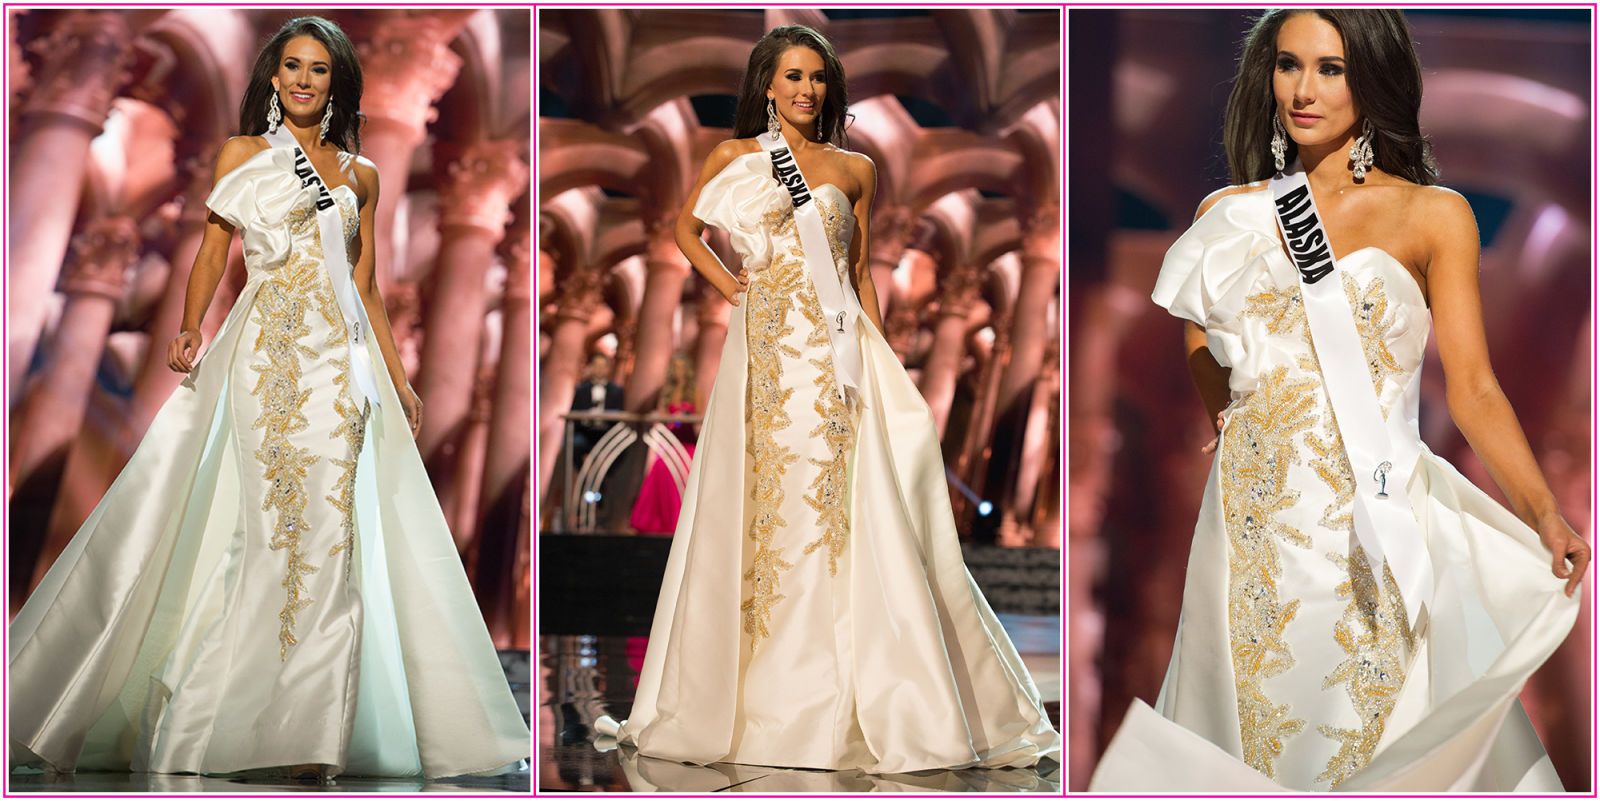 See All 52 Miss USA Contestants In Their Sparkly Glamorous Evening Gowns